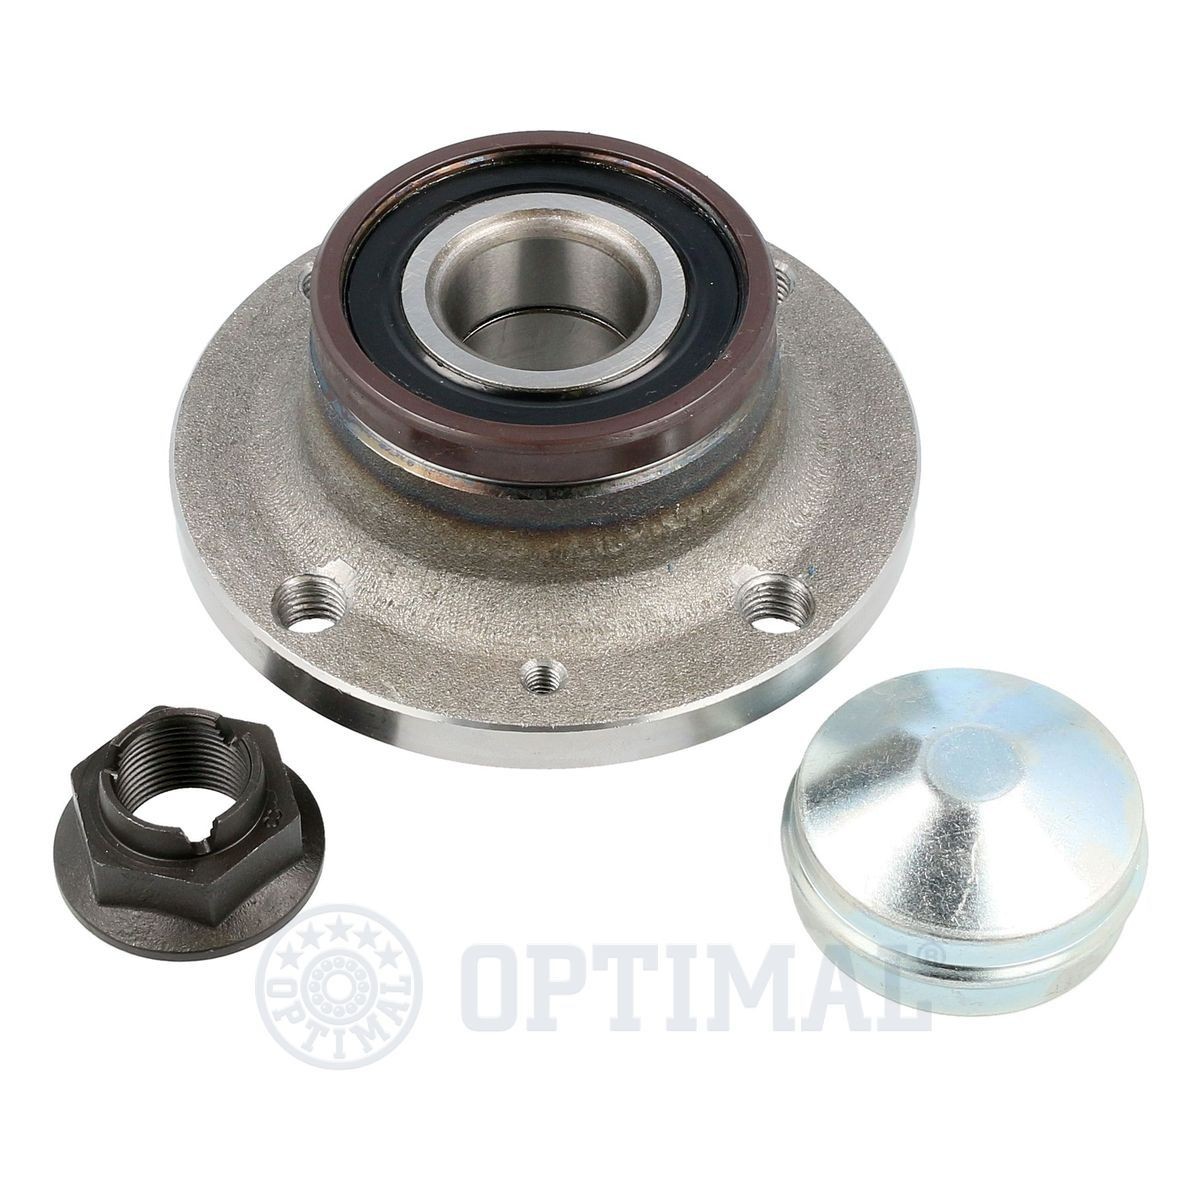 OPTIMAL 202290 Wheel bearing kit Rear Axle Left, Rear Axle Right, with integrated magnetic sensor ring, 120 mm